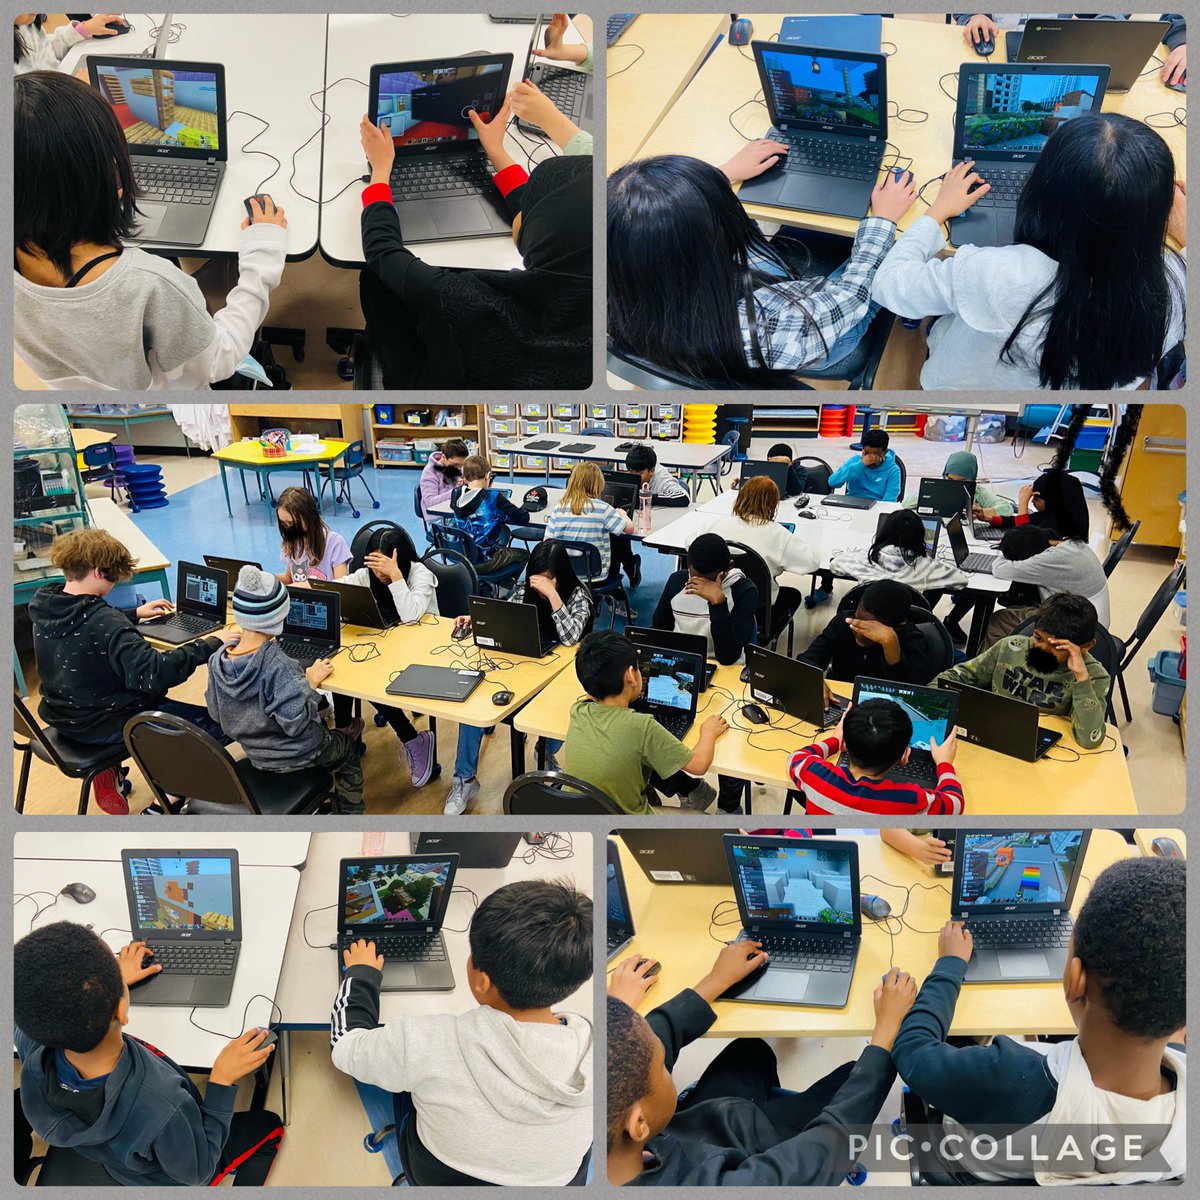 #LevelUpCalgary Minecraft Season 3: Park & Portals is in full swing @RadissonParkCBE! Students are fully engaged in building vibrant and sustainable public spaces! @cityofcalgary @yyCBEdu #CBEMinecraft #WeAreCBE @CBEArea3 @CBELearningTech @blaistech @AriaAzizi #RPSLearns